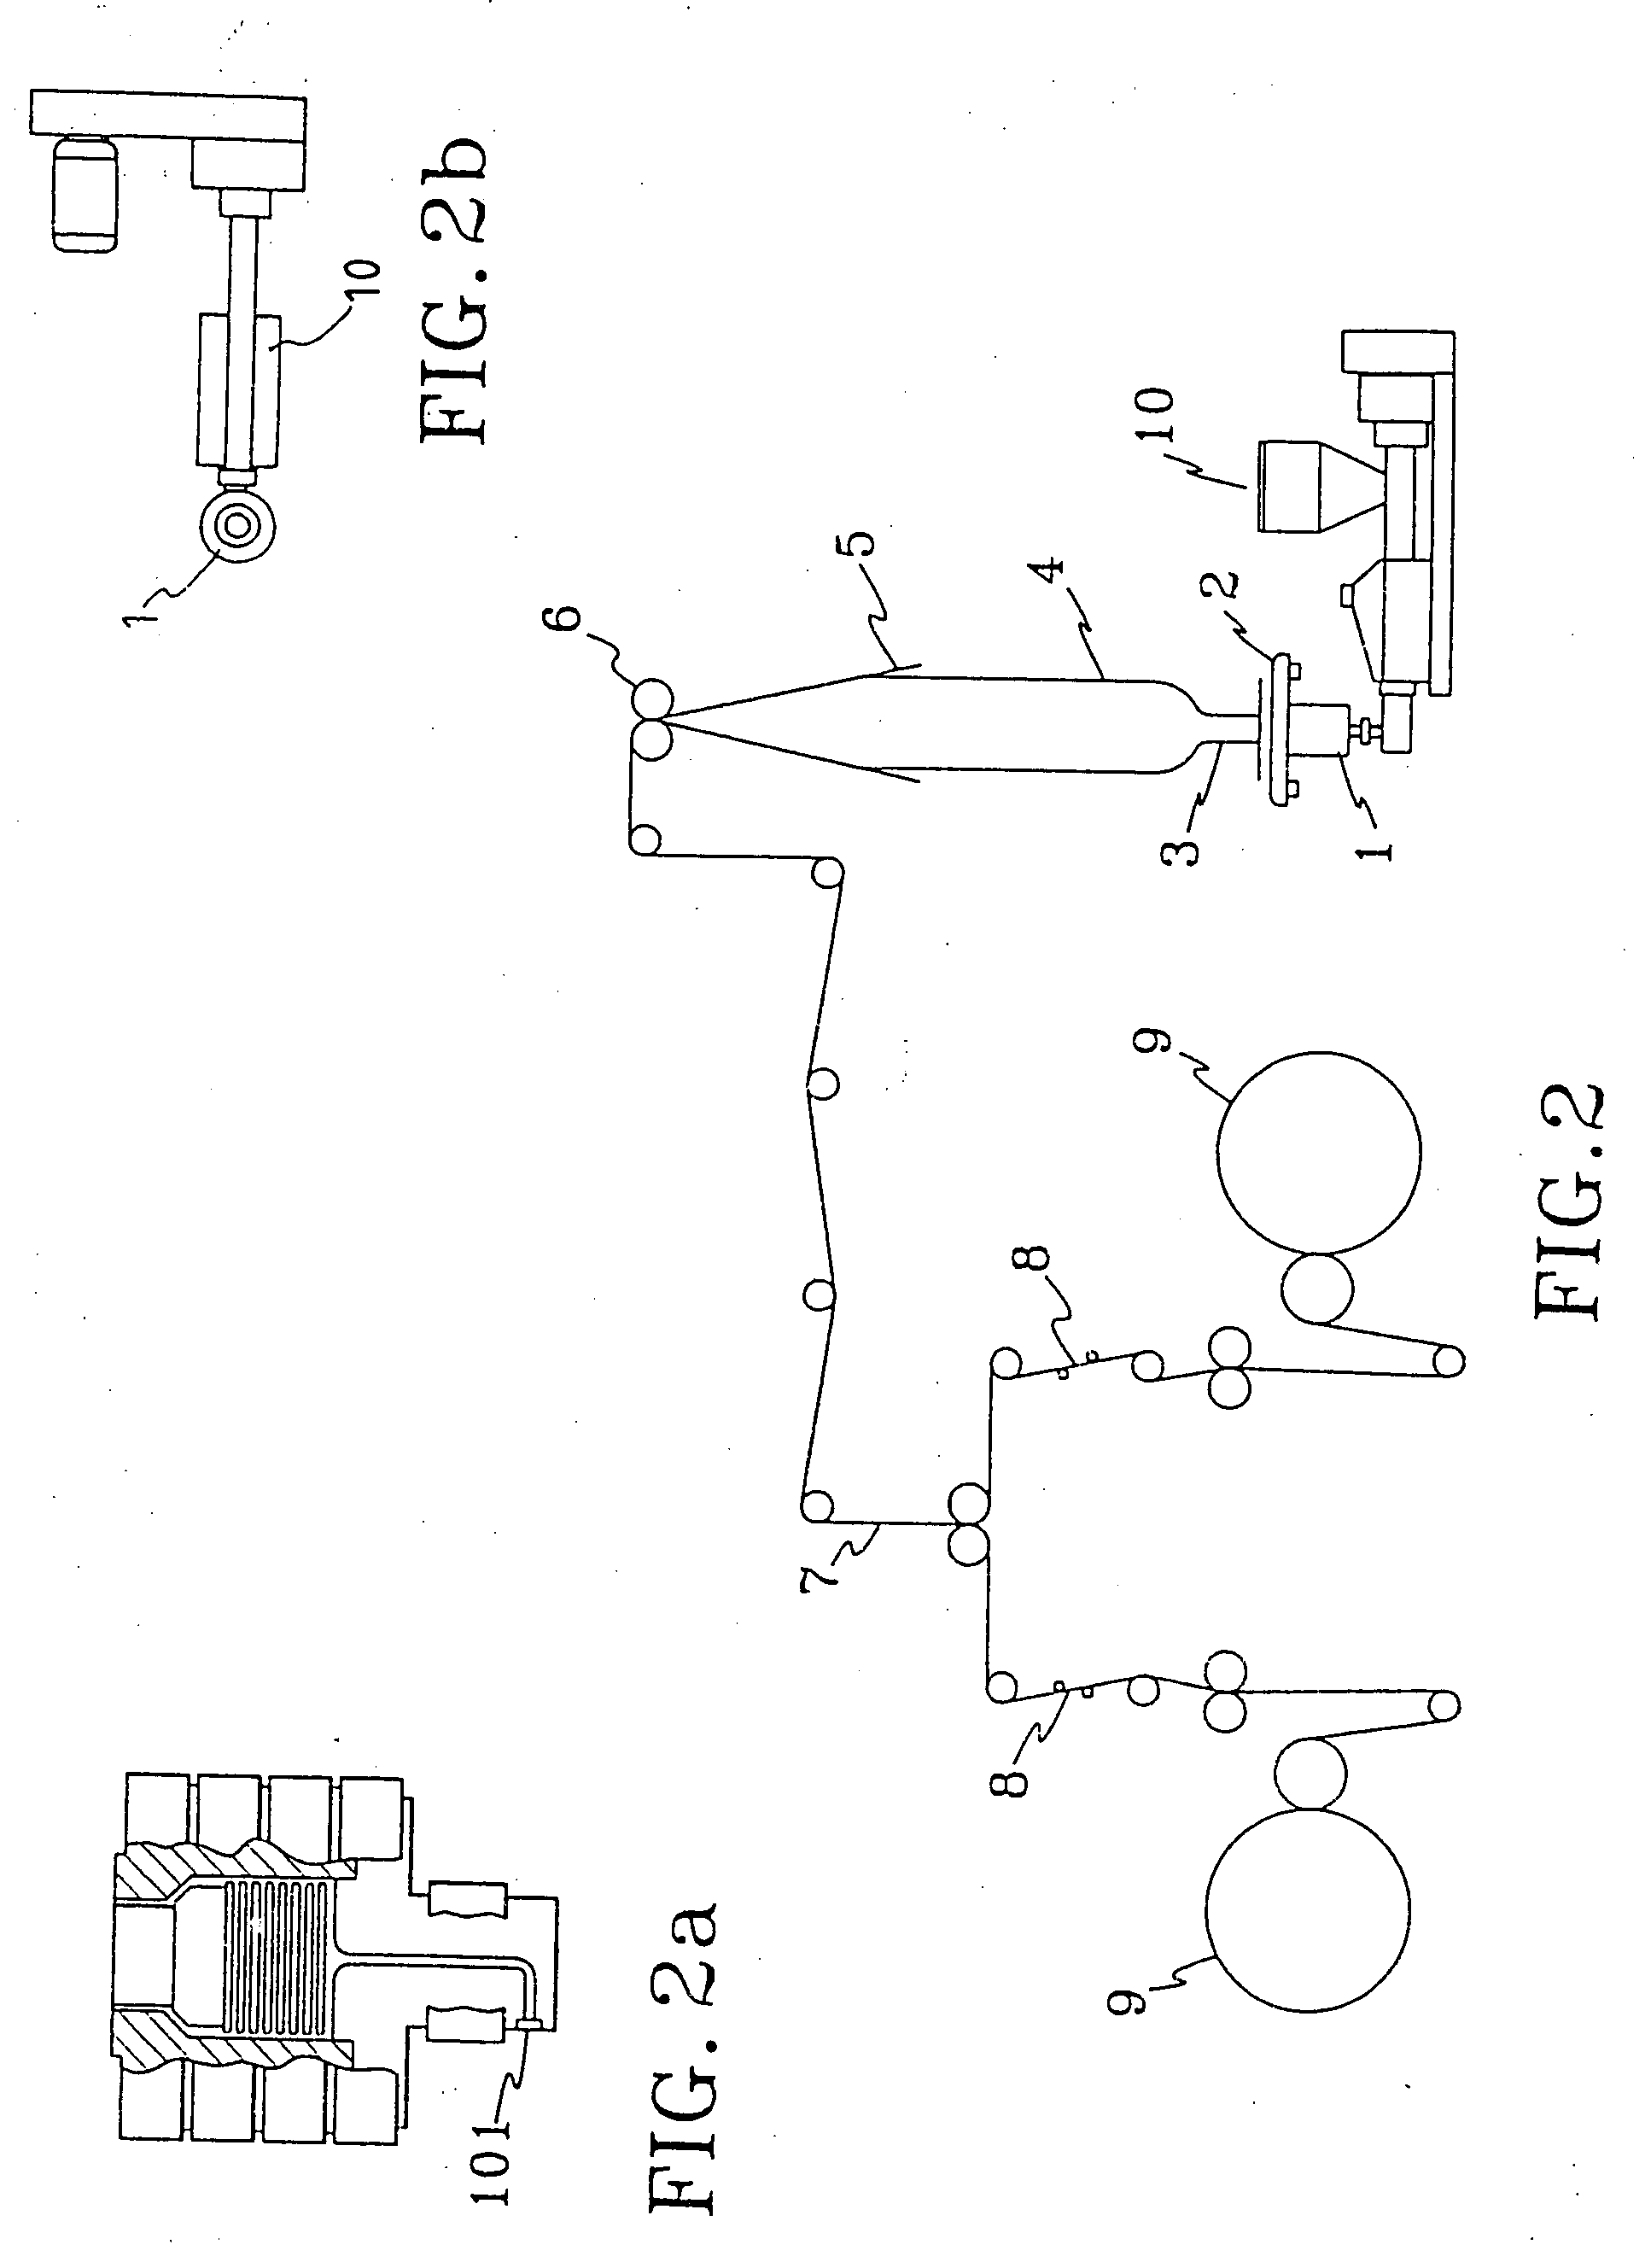 Process for the manufacture of environmentally friendly papers and compositions therefor